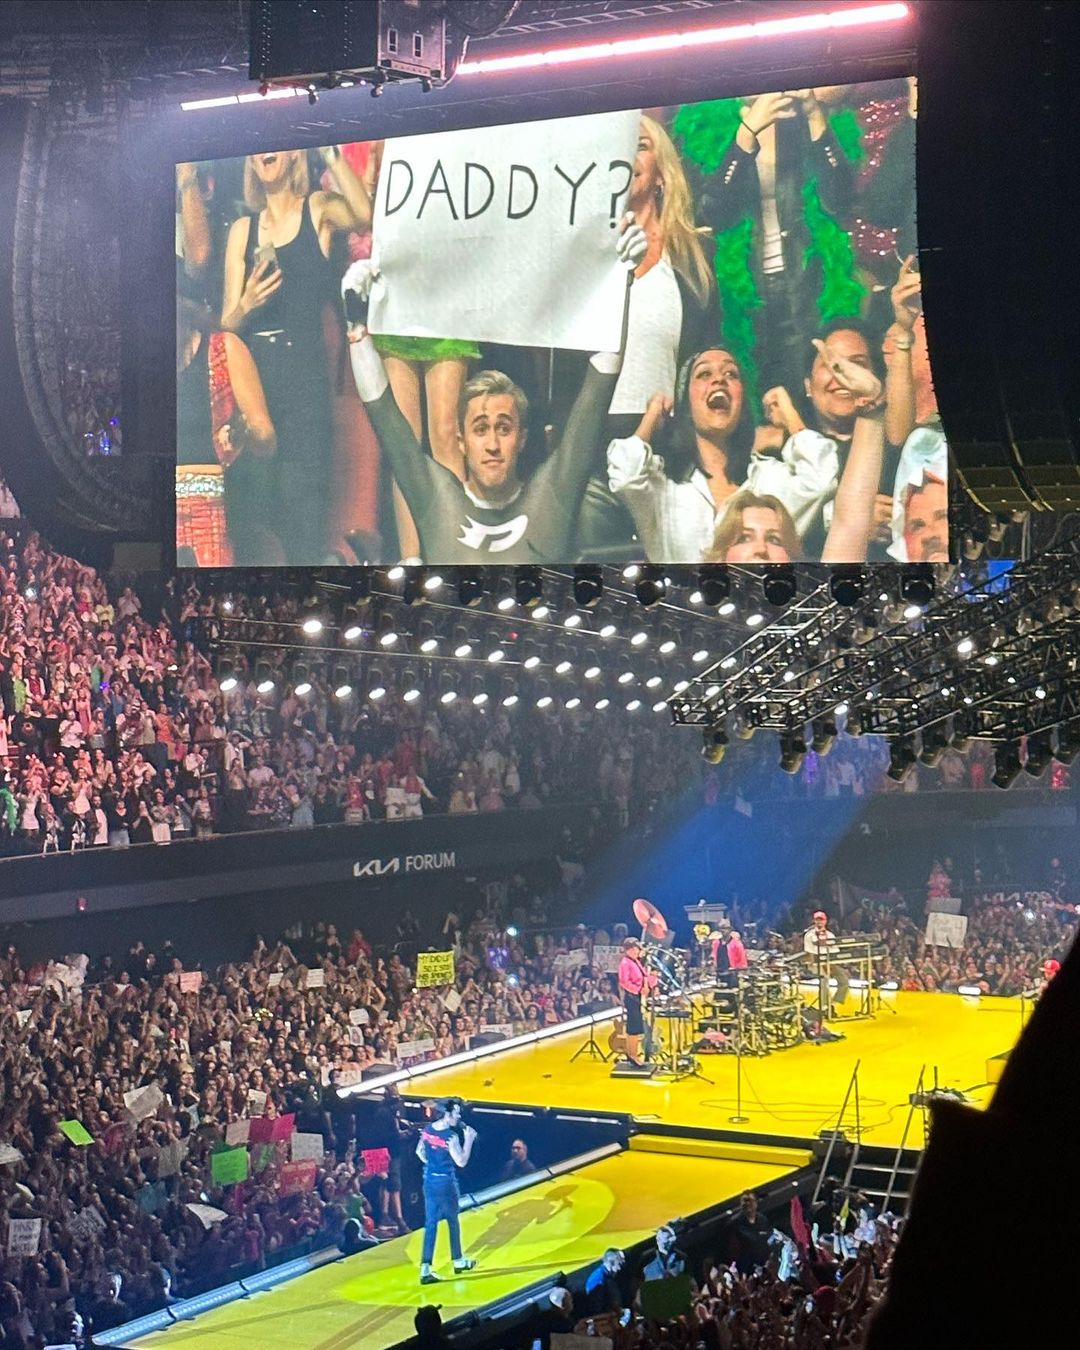 Chris Olsen holding the "Daddy?" sign at the Harryween show